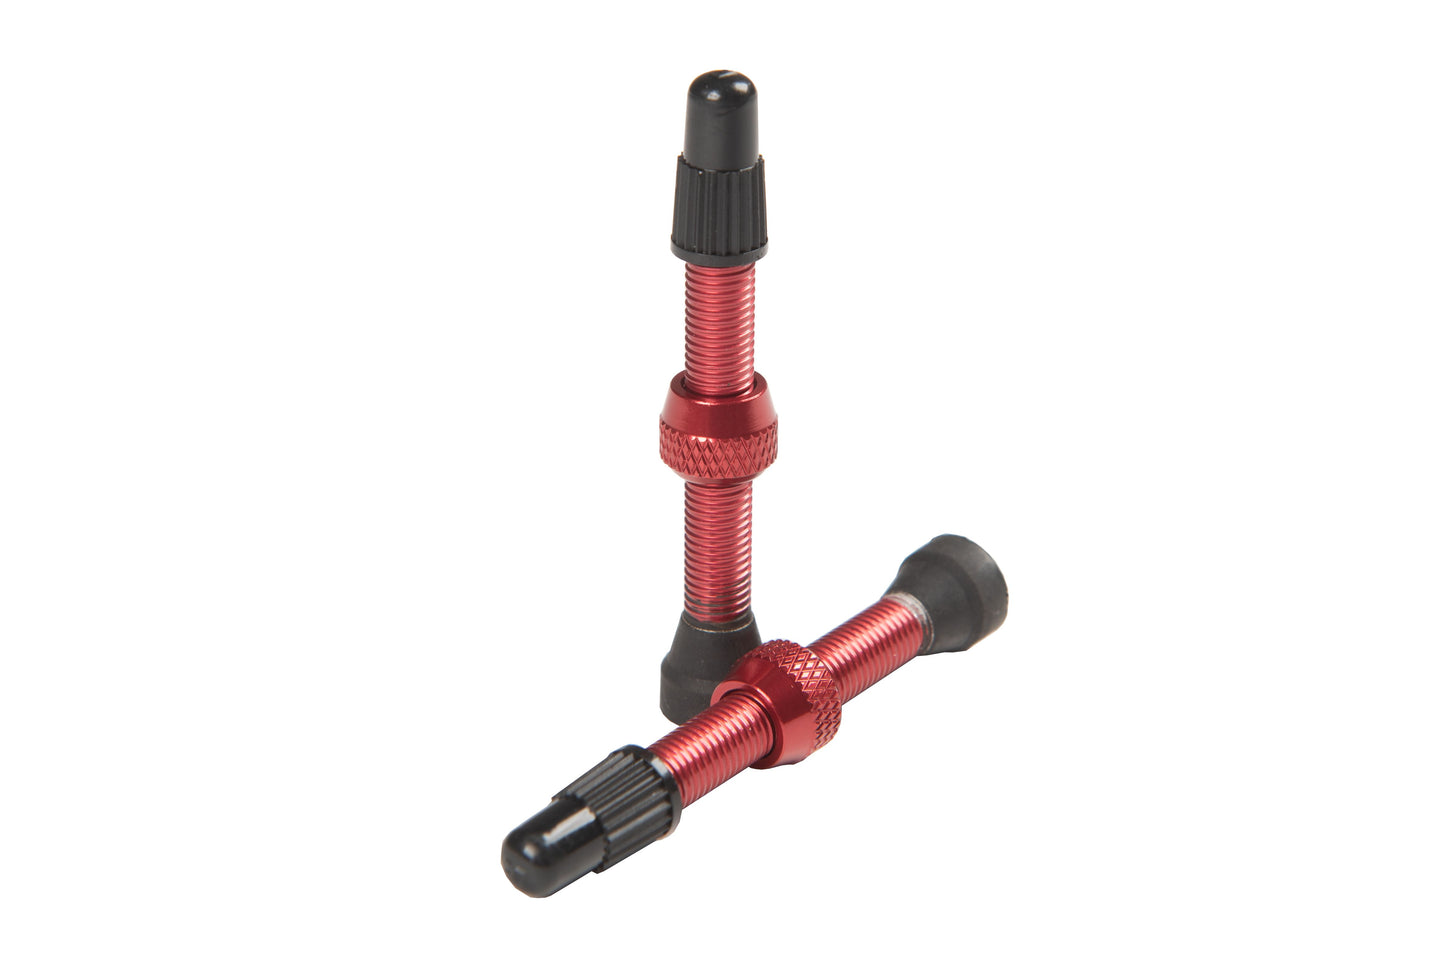 Stan's No Tubes Tubeless Valve Stems Presta Valve in Red Finish Color | Bicycle Tubeless Technology from Sprocket Kings